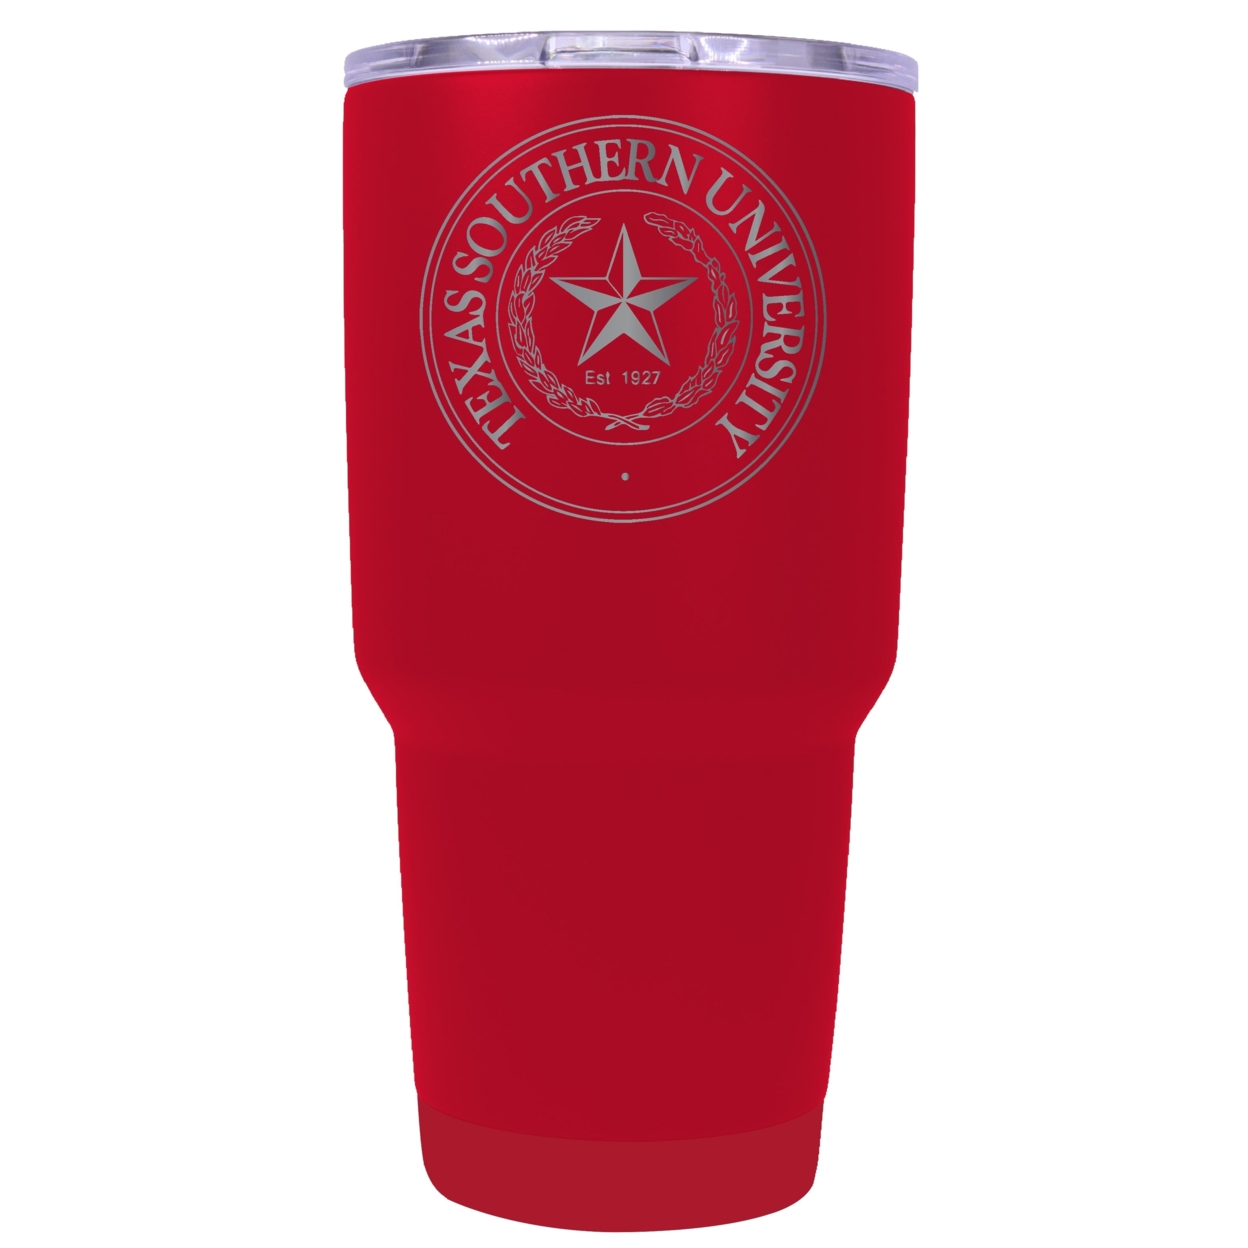 Texas Southern University 24 Oz Laser Engraved Stainless Steel Insulated Tumbler - Choose Your Color. - Red